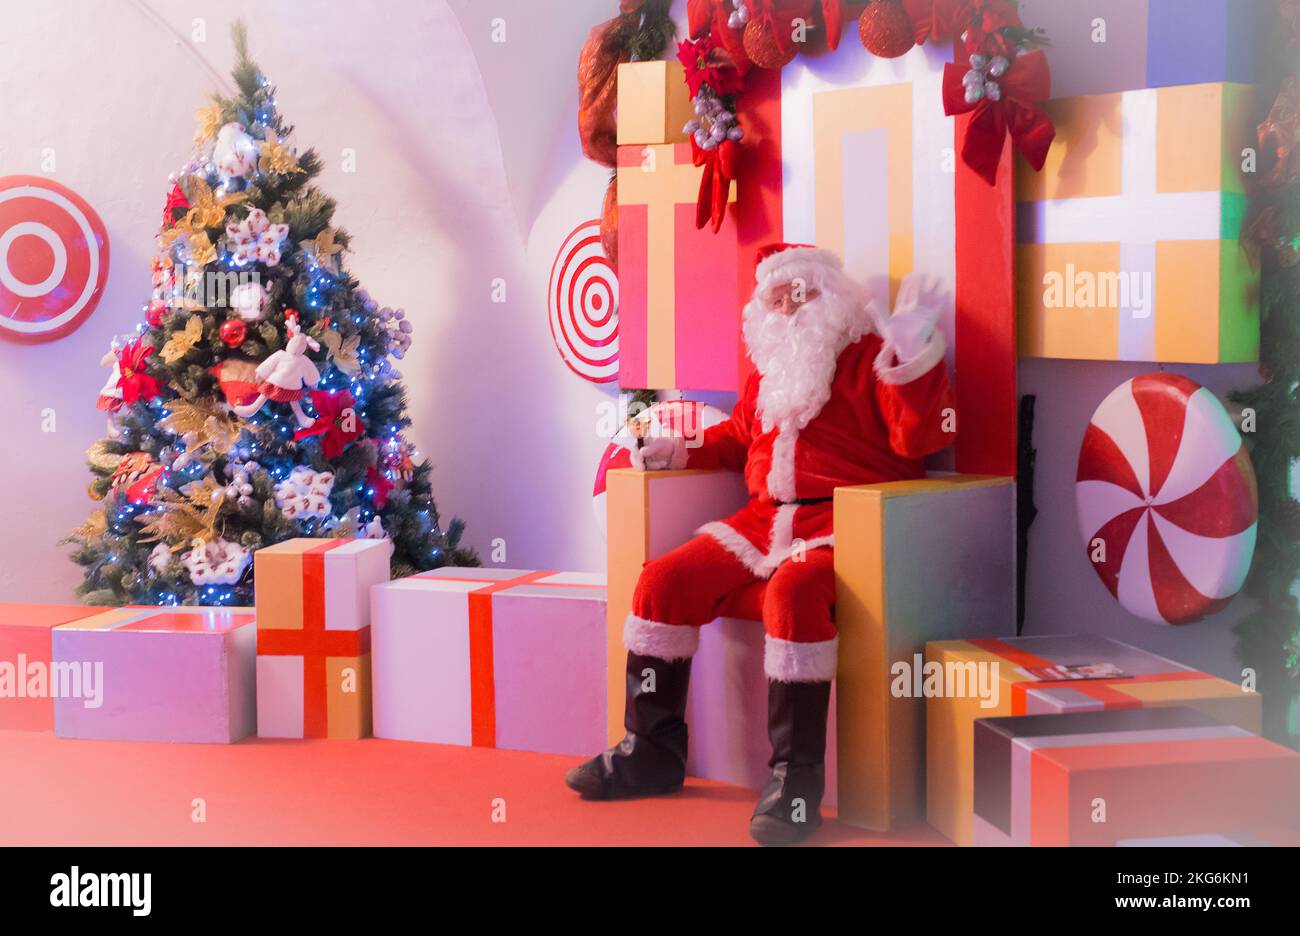 Magic atmosphere in the Christmas  with Santa Claus Stock Photo